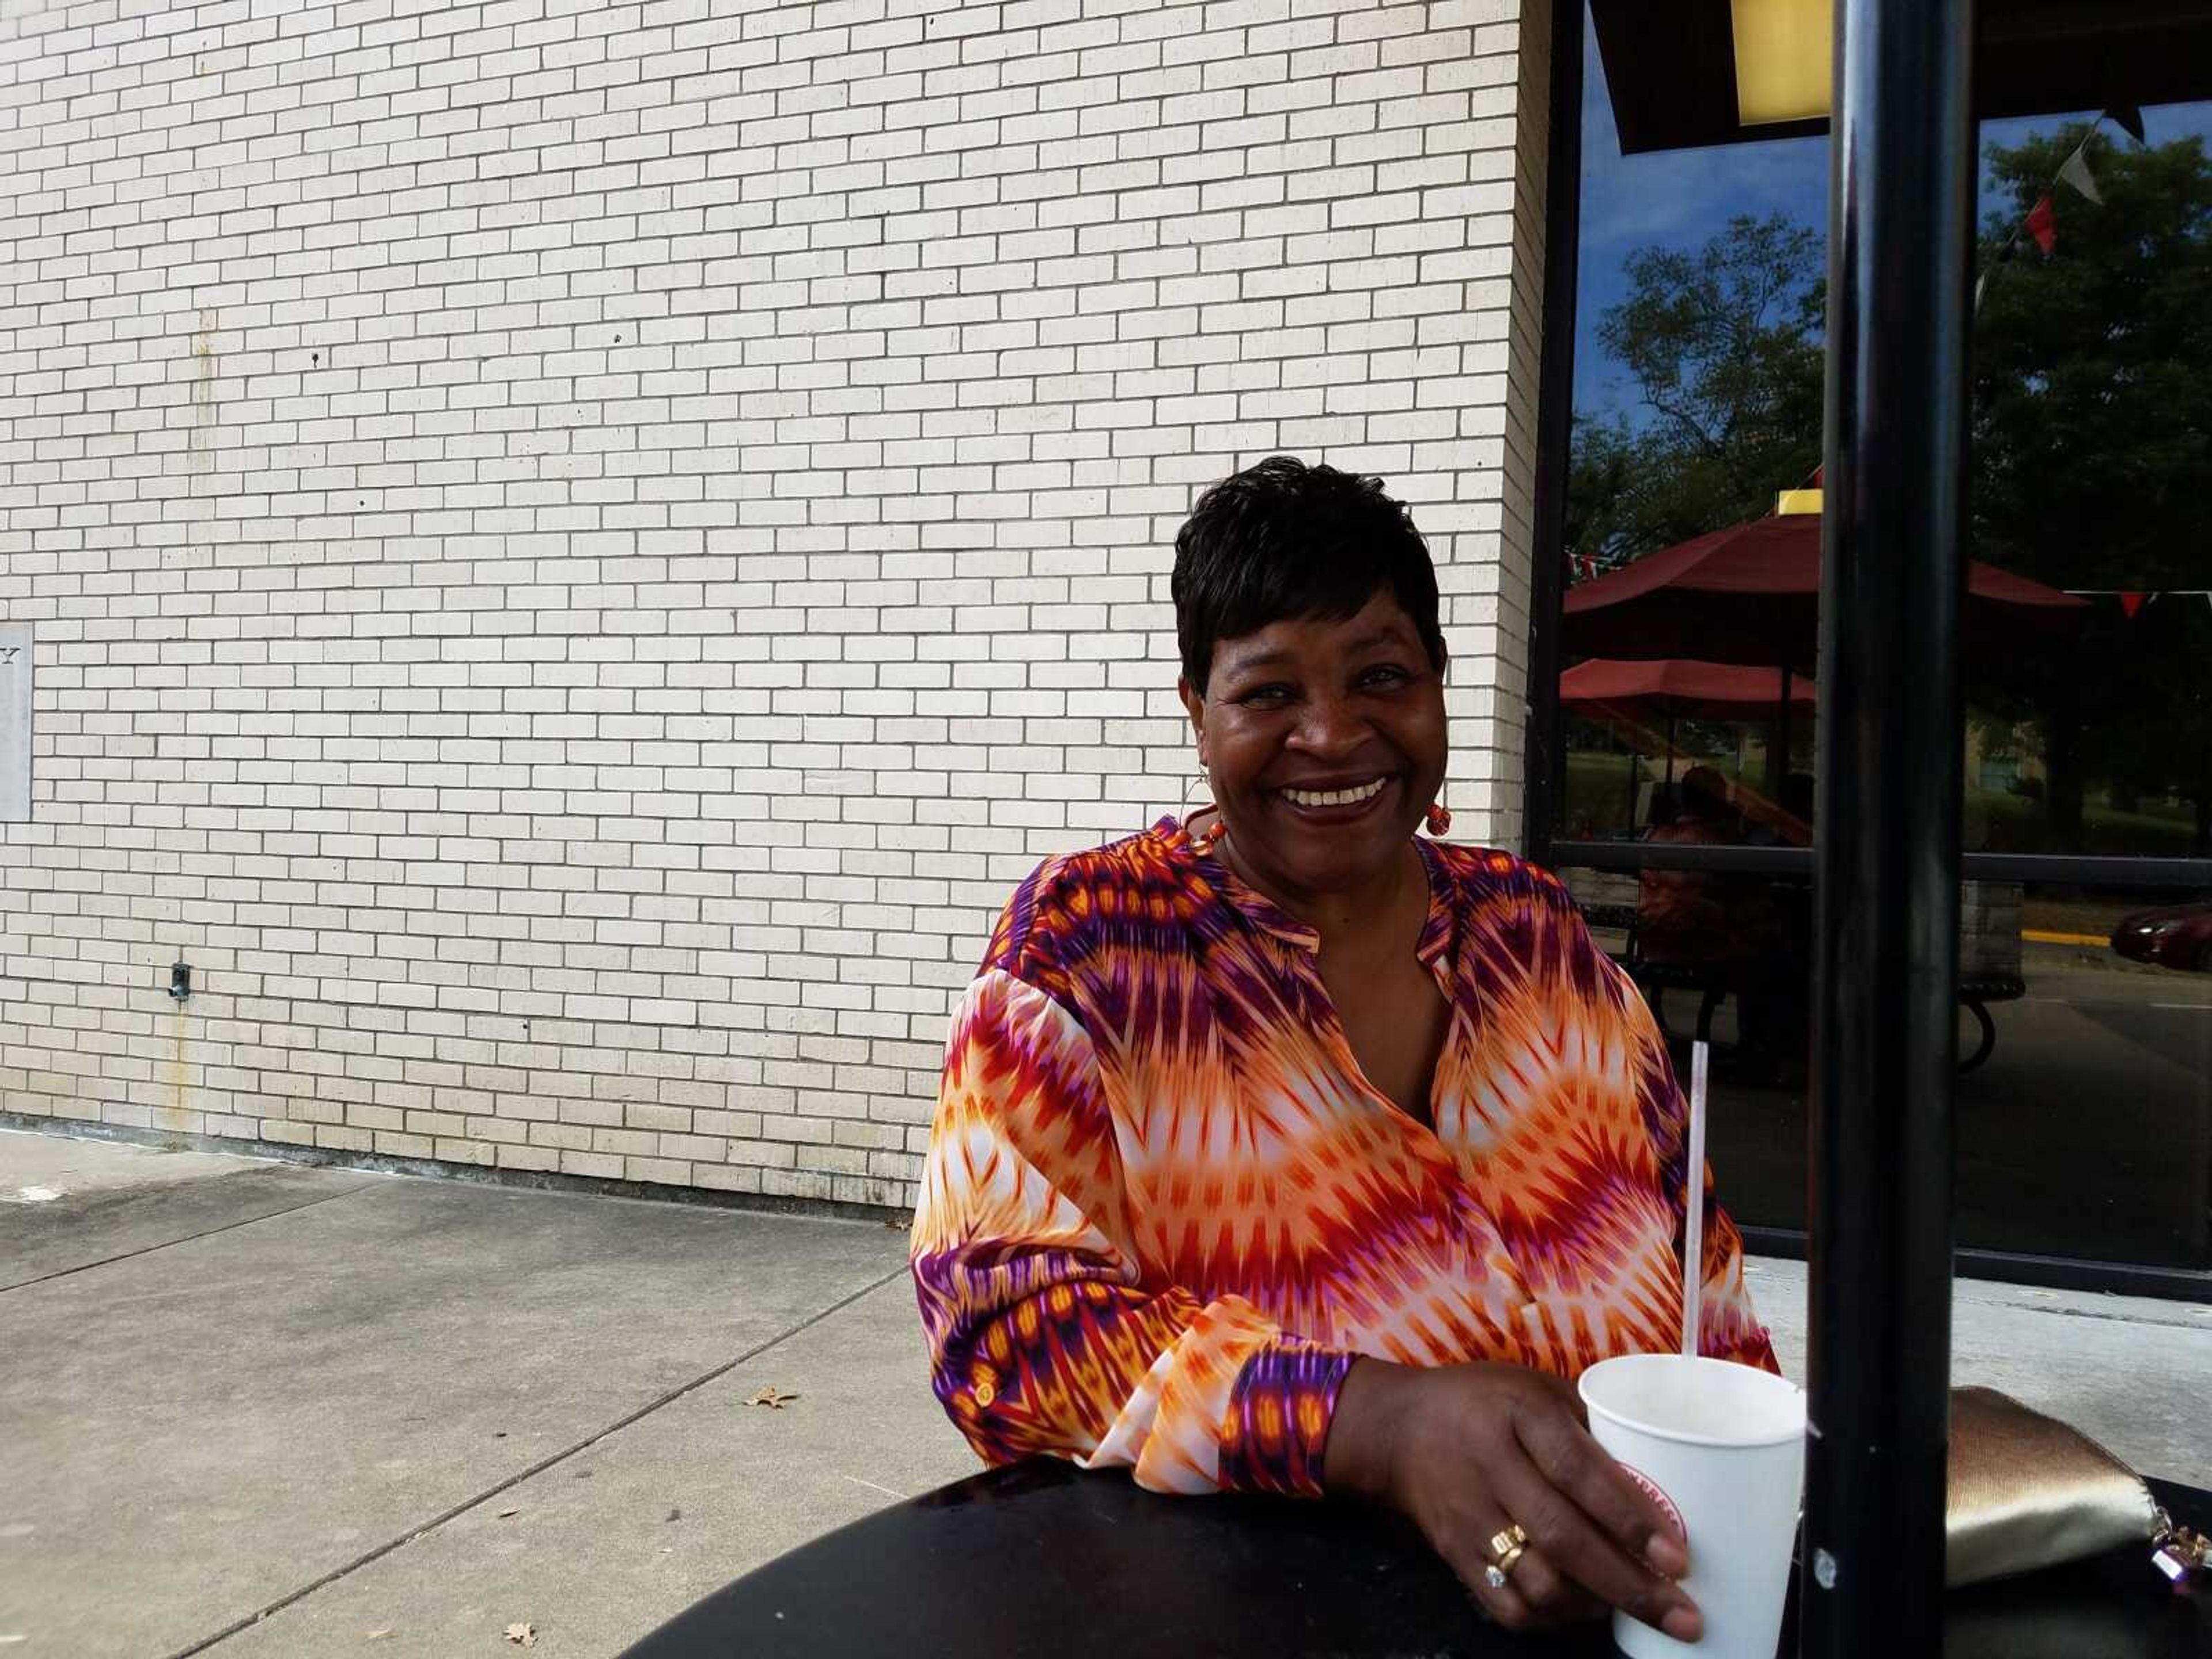 A missing face on campus: Redhawk Market's "Miss Cynthia" out on work leave